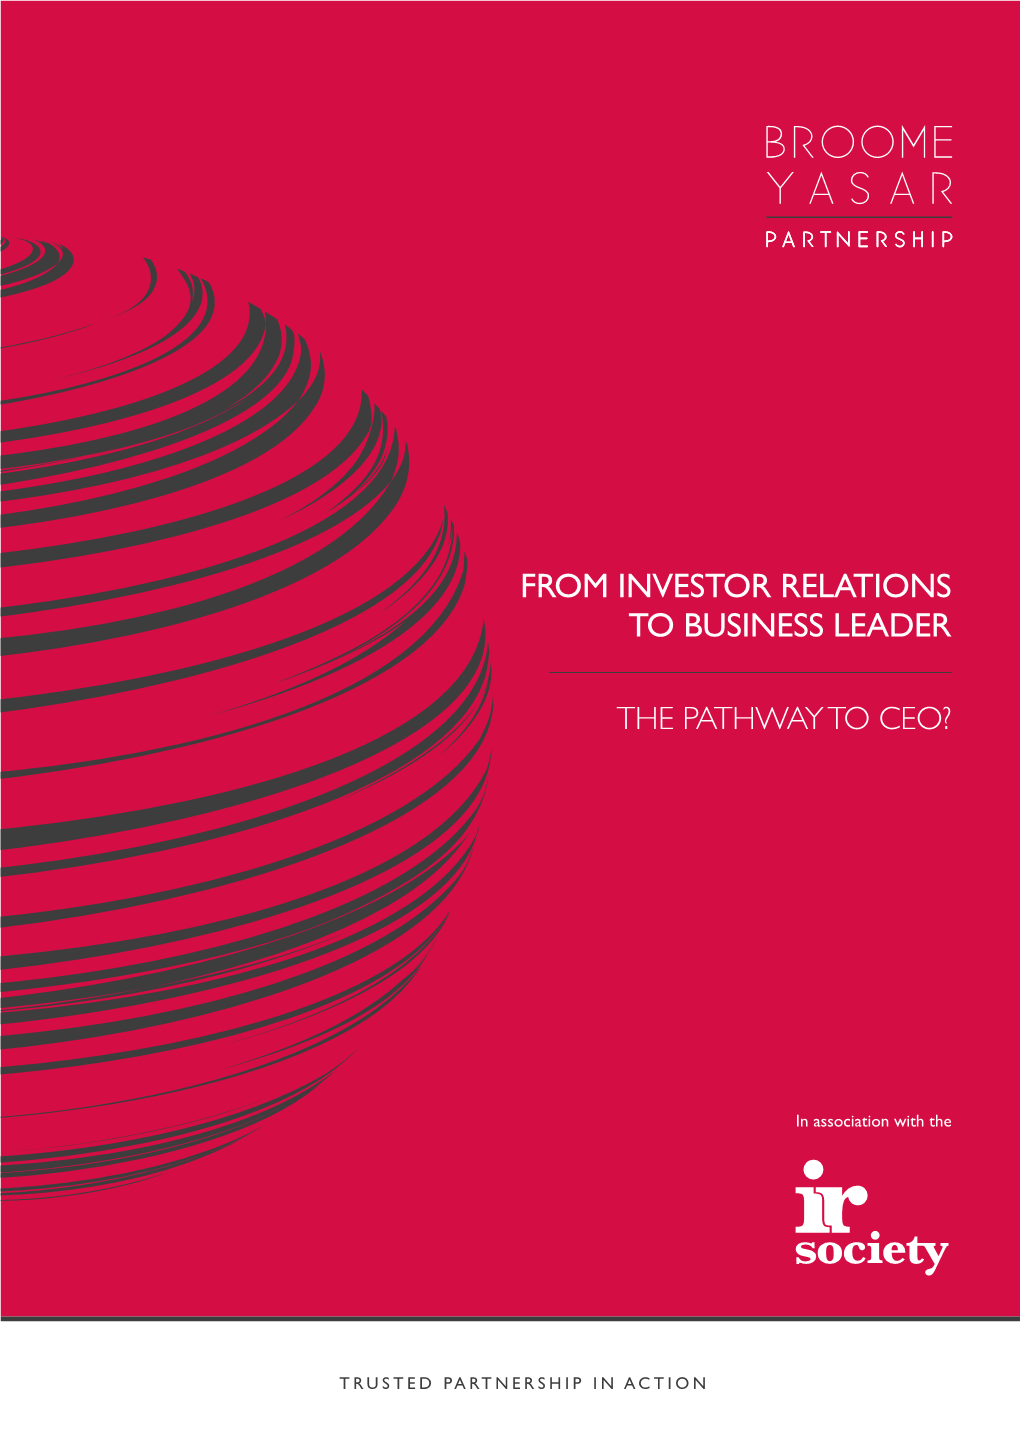 From Investor Relations to Business Leader